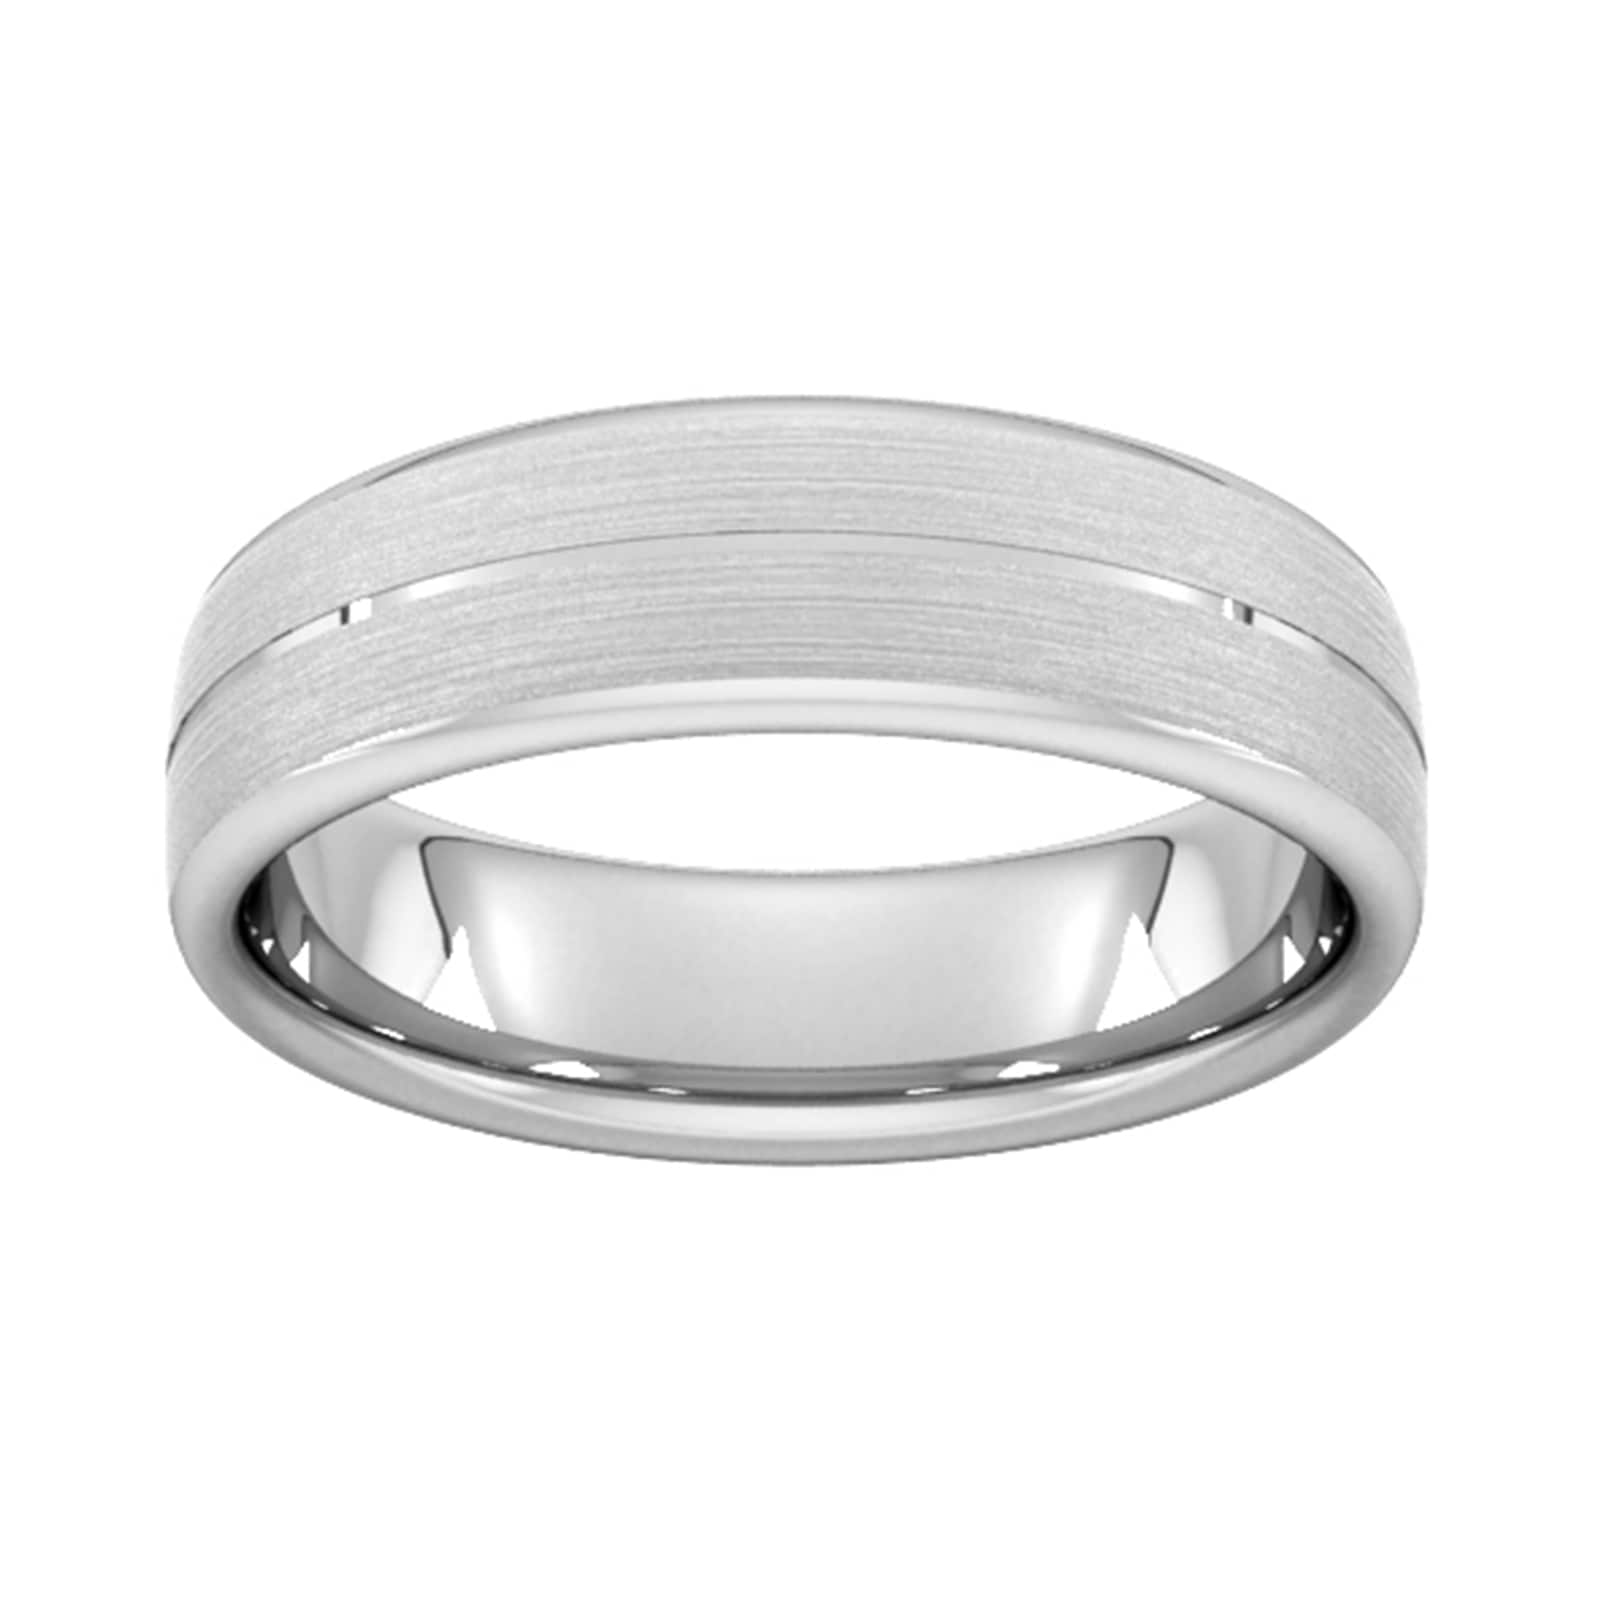 6mm D Shape Standard Centre Groove With Chamfered Edge Wedding Ring In 950 Palladium - Ring Size U